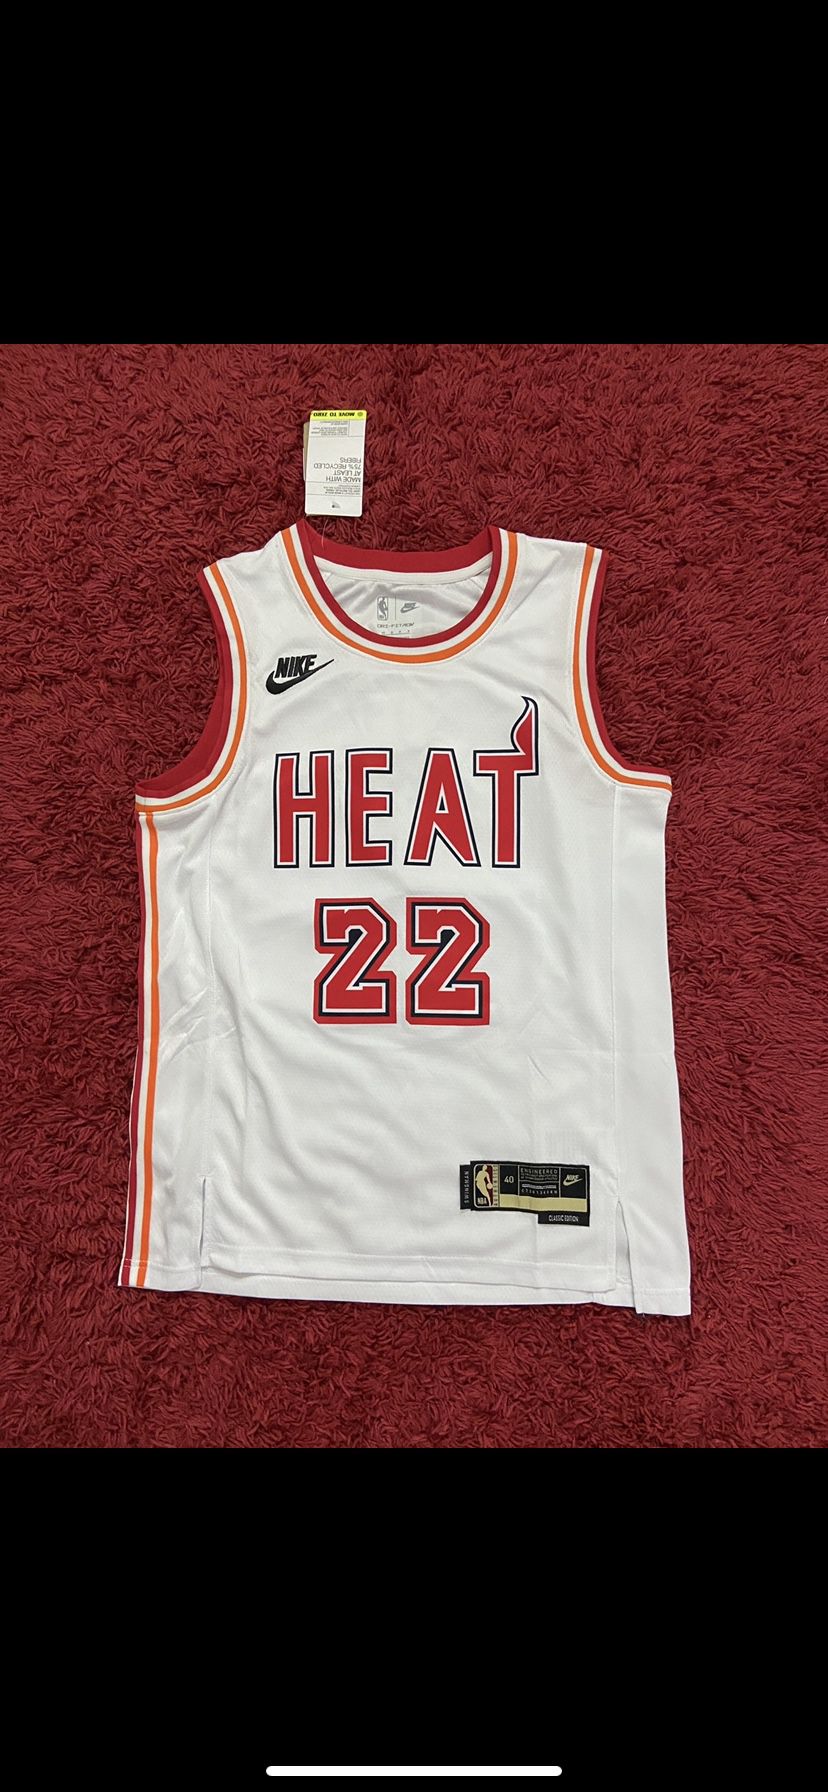 NBA Jerseys Miam Heat And More for Sale in Miami, FL - OfferUp